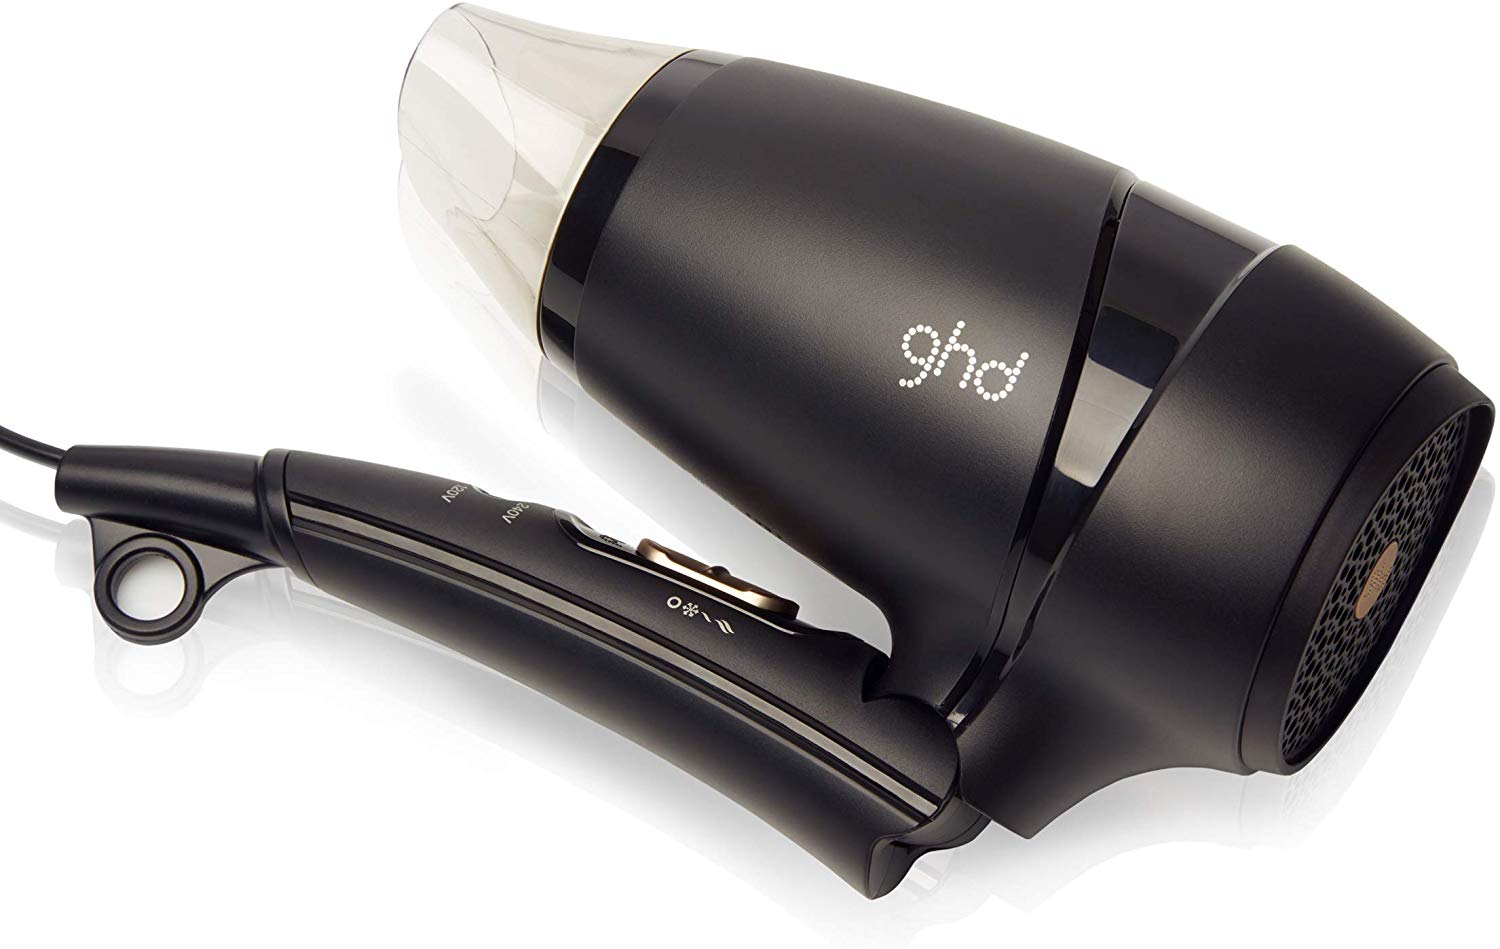 Image of the foldable GHD travel hair dryer in blck